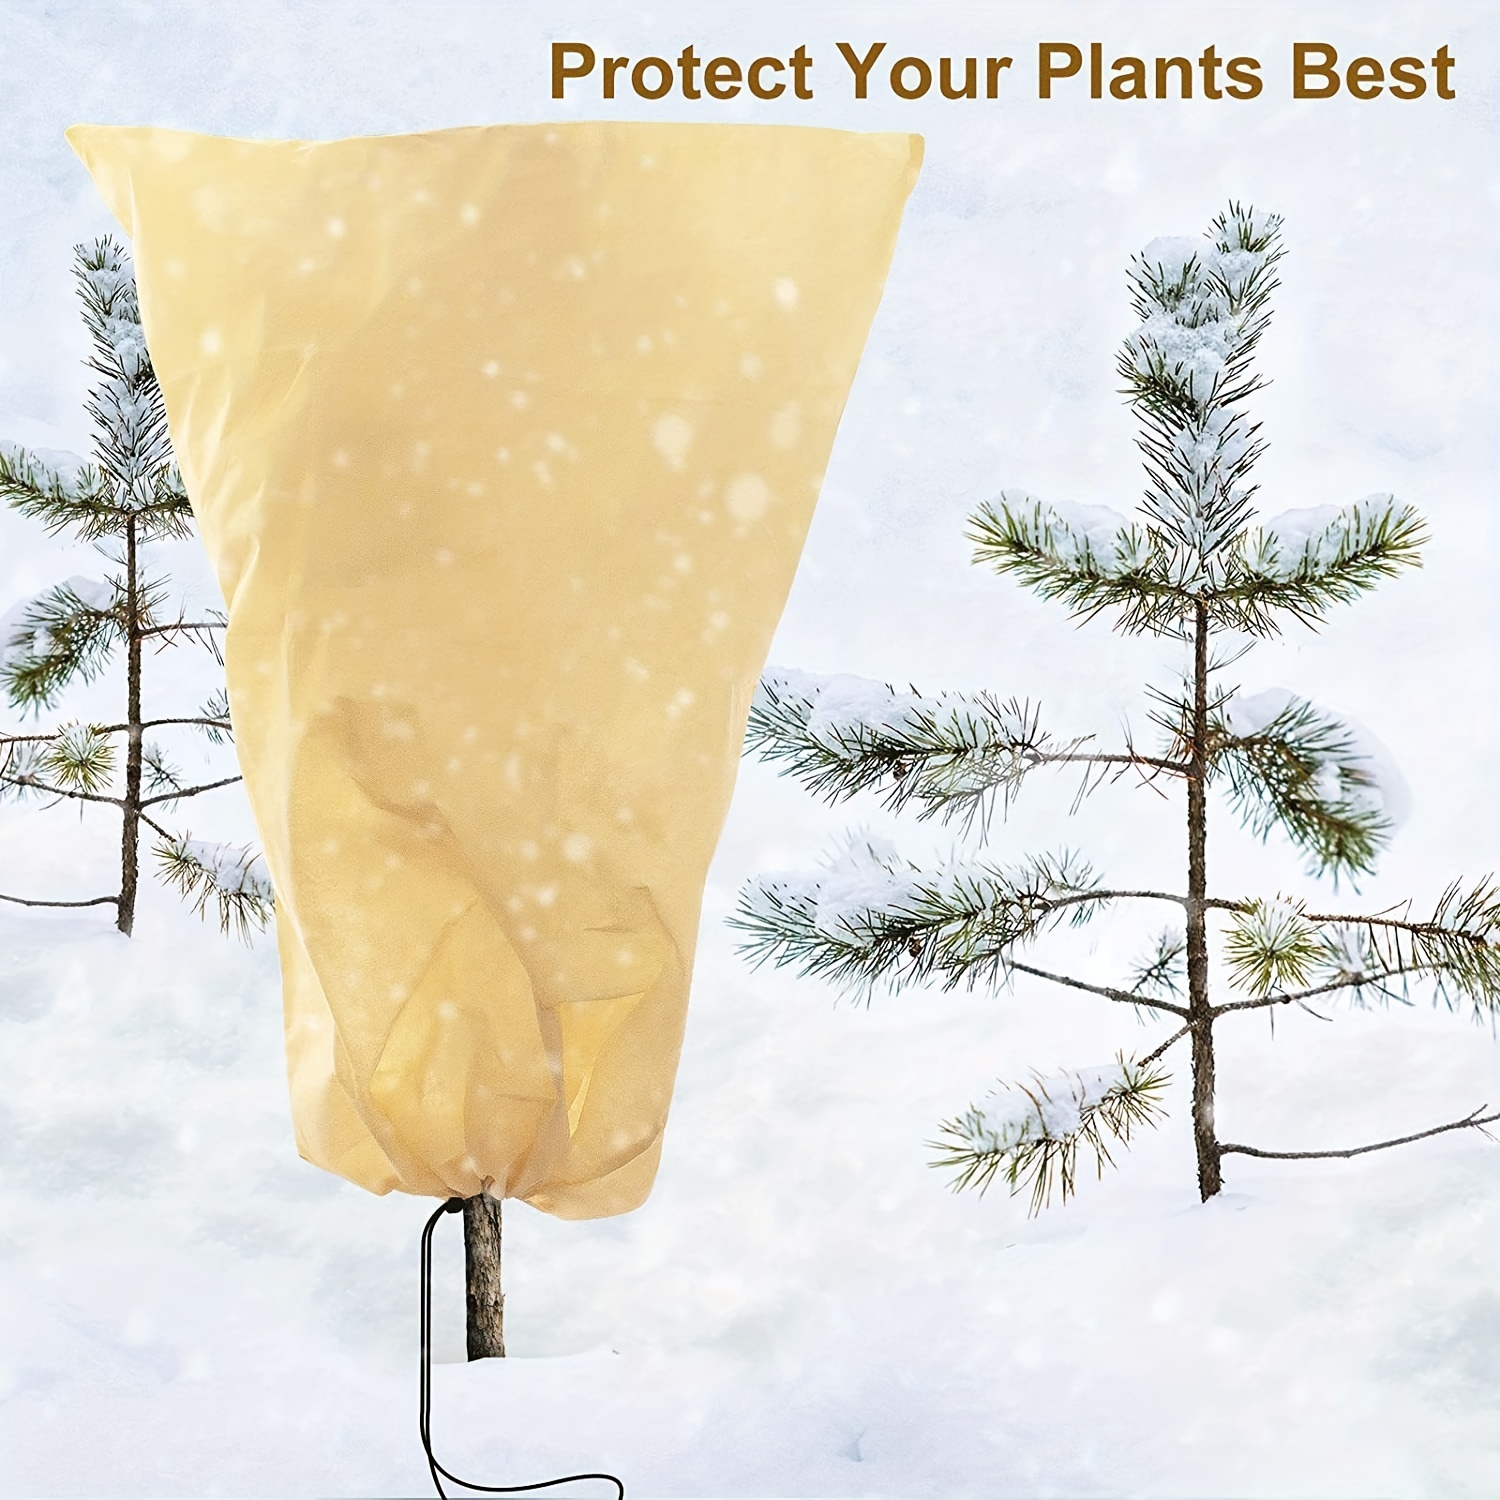 Extra Thick Fleece Blanket, Plant Protection